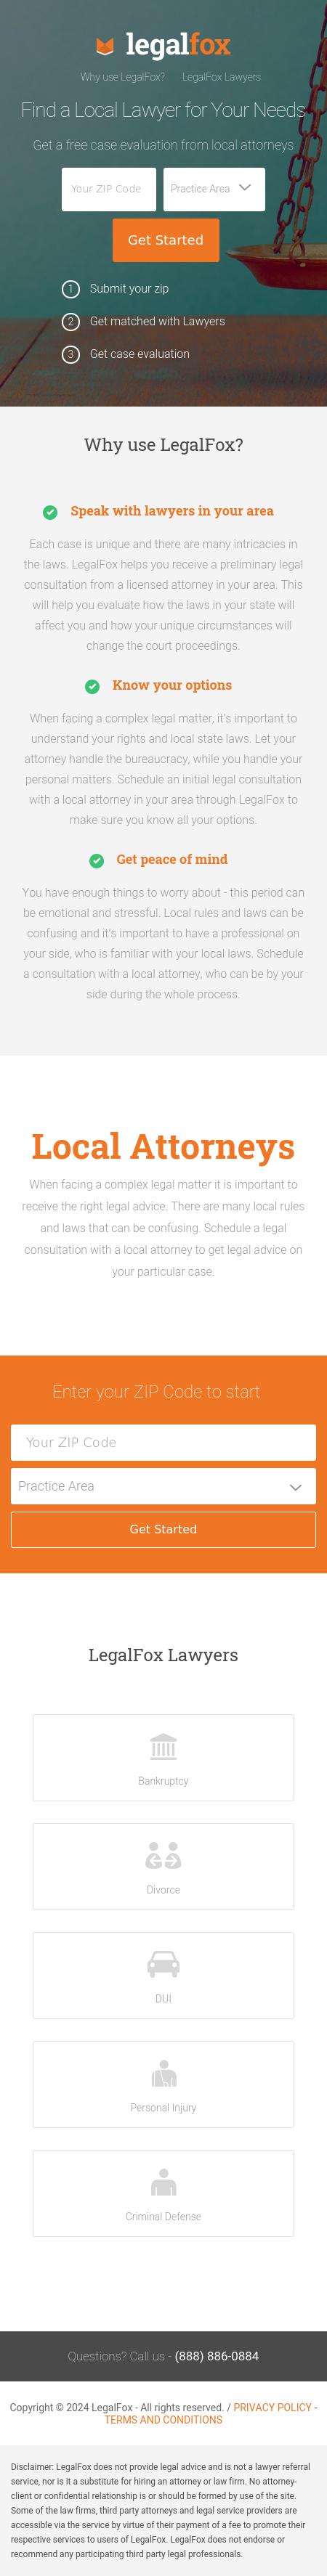 Find a Local Attorney - Chelmsford MA Lawyers